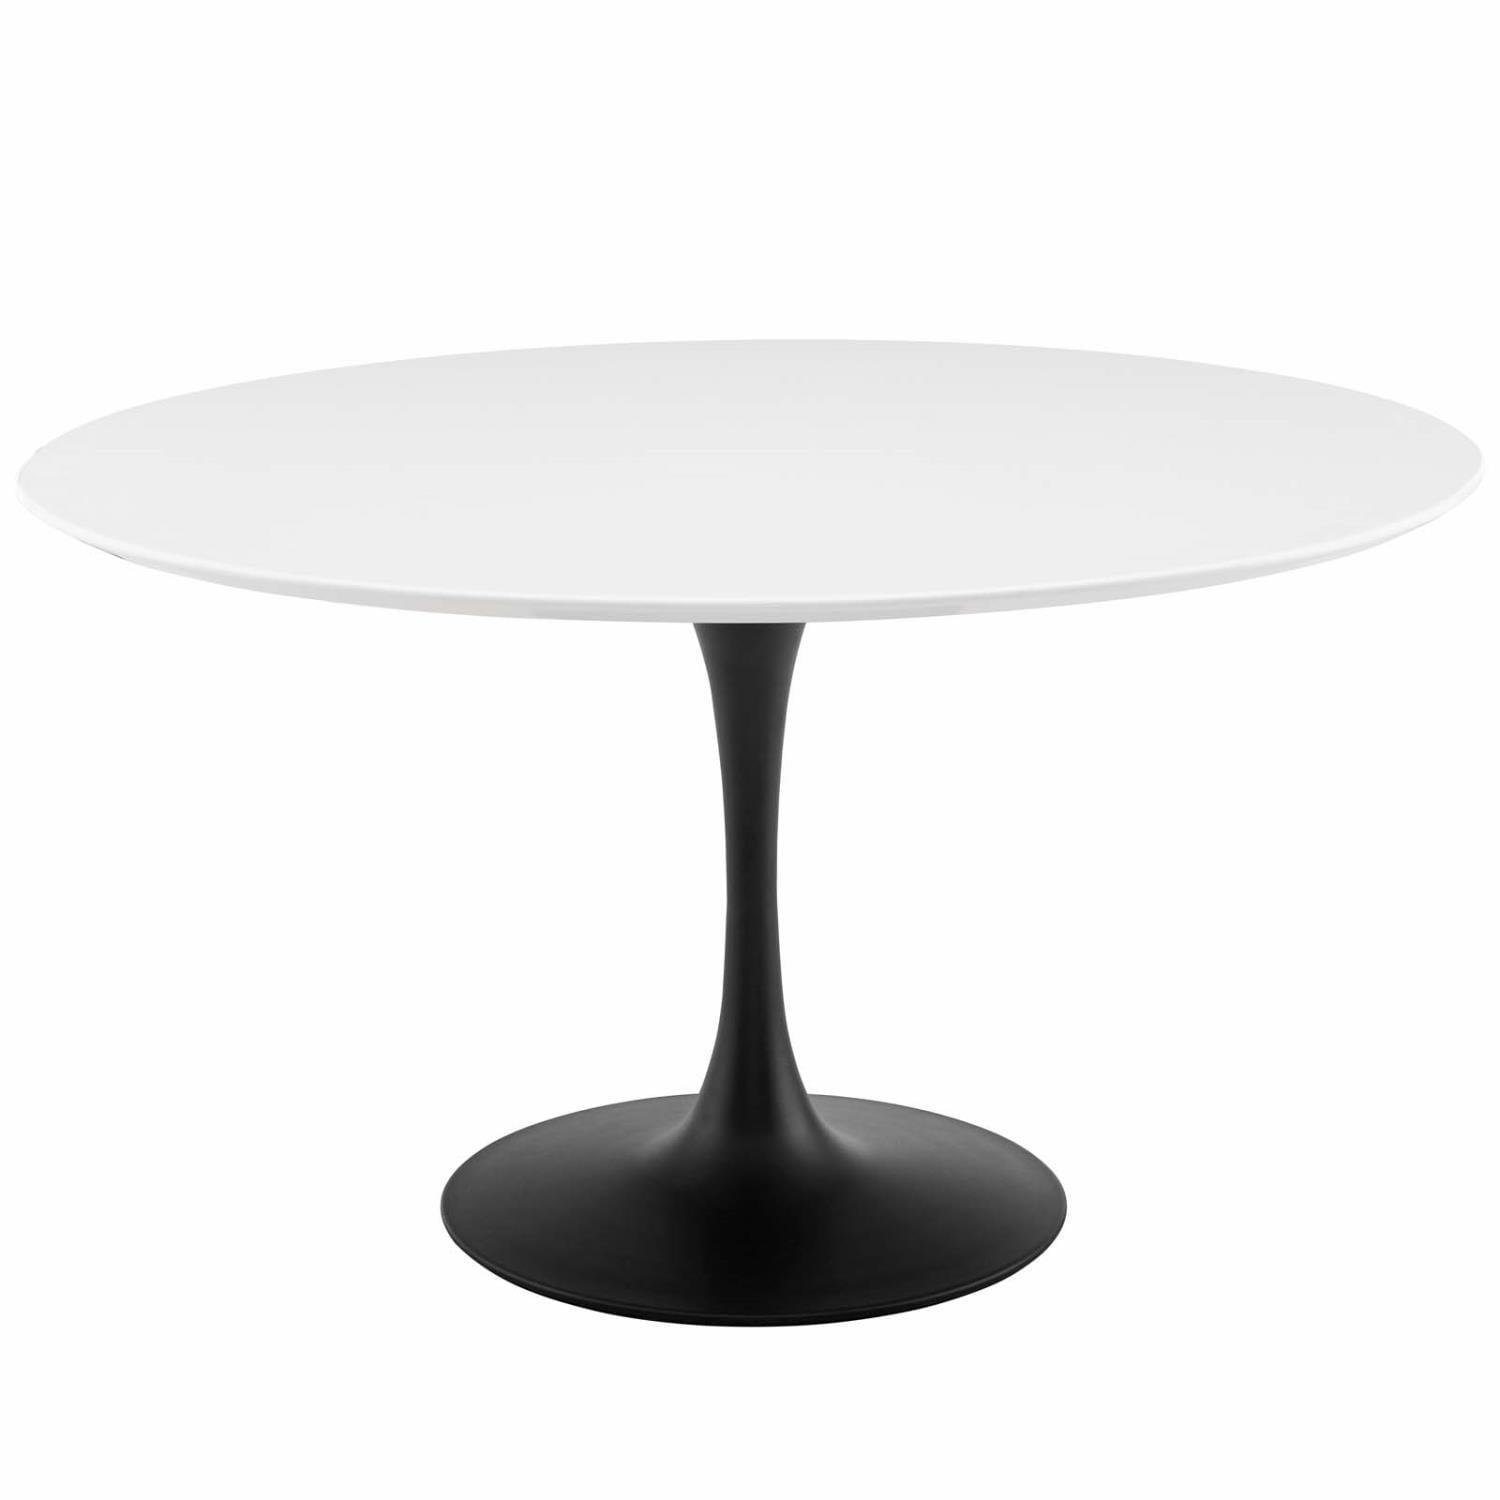 Mid-Century Modern 54" Round Wood Dining Table in Black & White